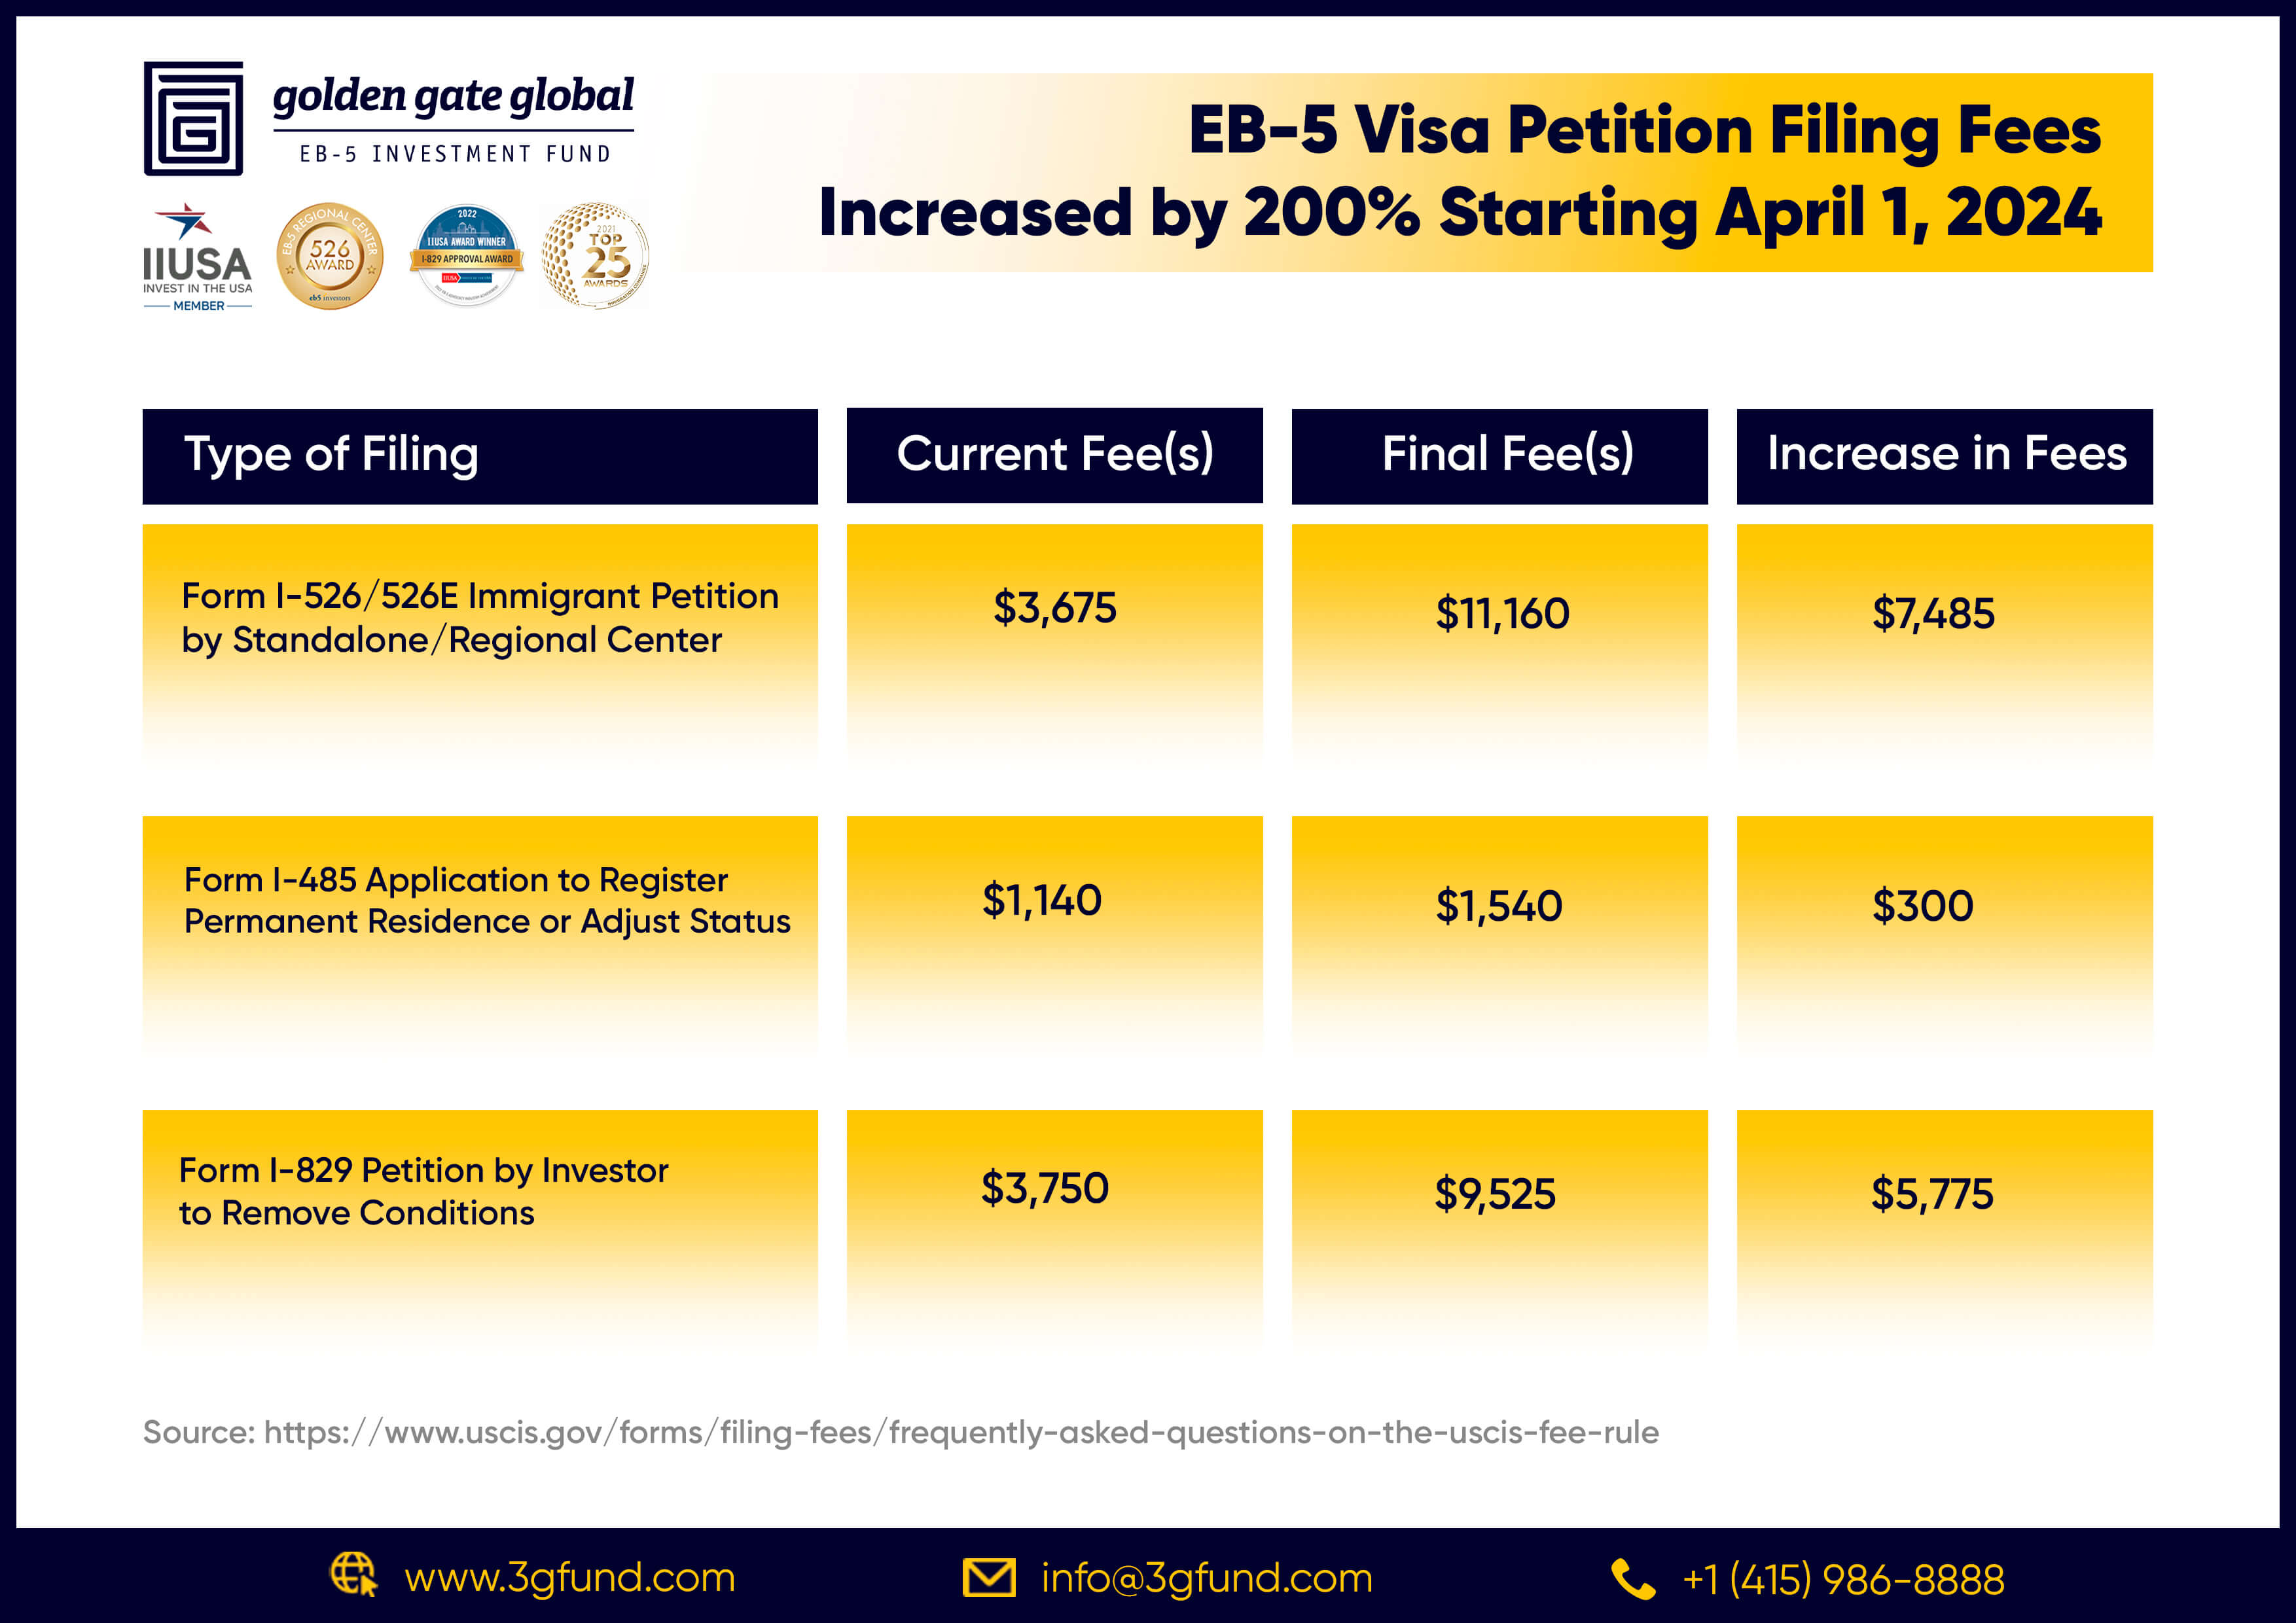 EB-5 Visa Petition Filing Fees Increased by 200 procent Starting April 1, 2024